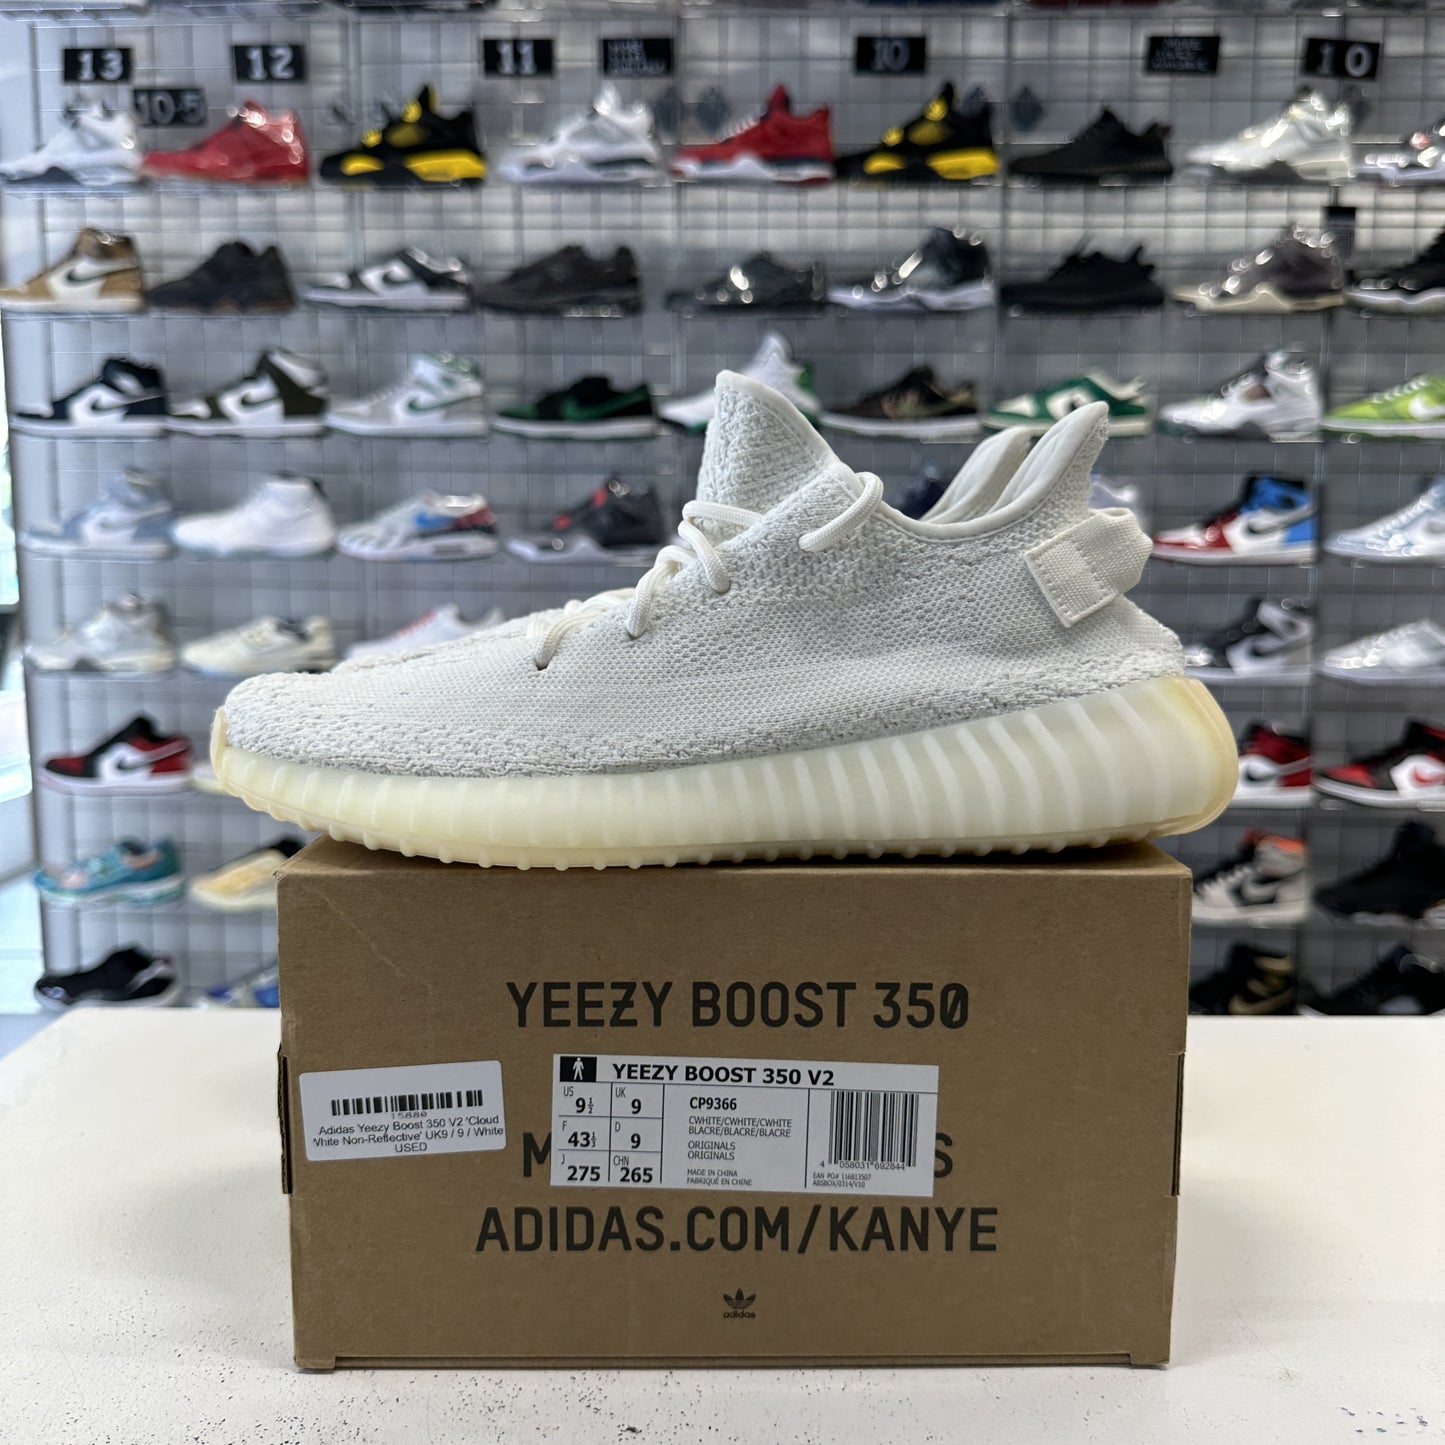 adidas Yeezy Boost 350 V2 'Cloud White Non-Reflective' UK9